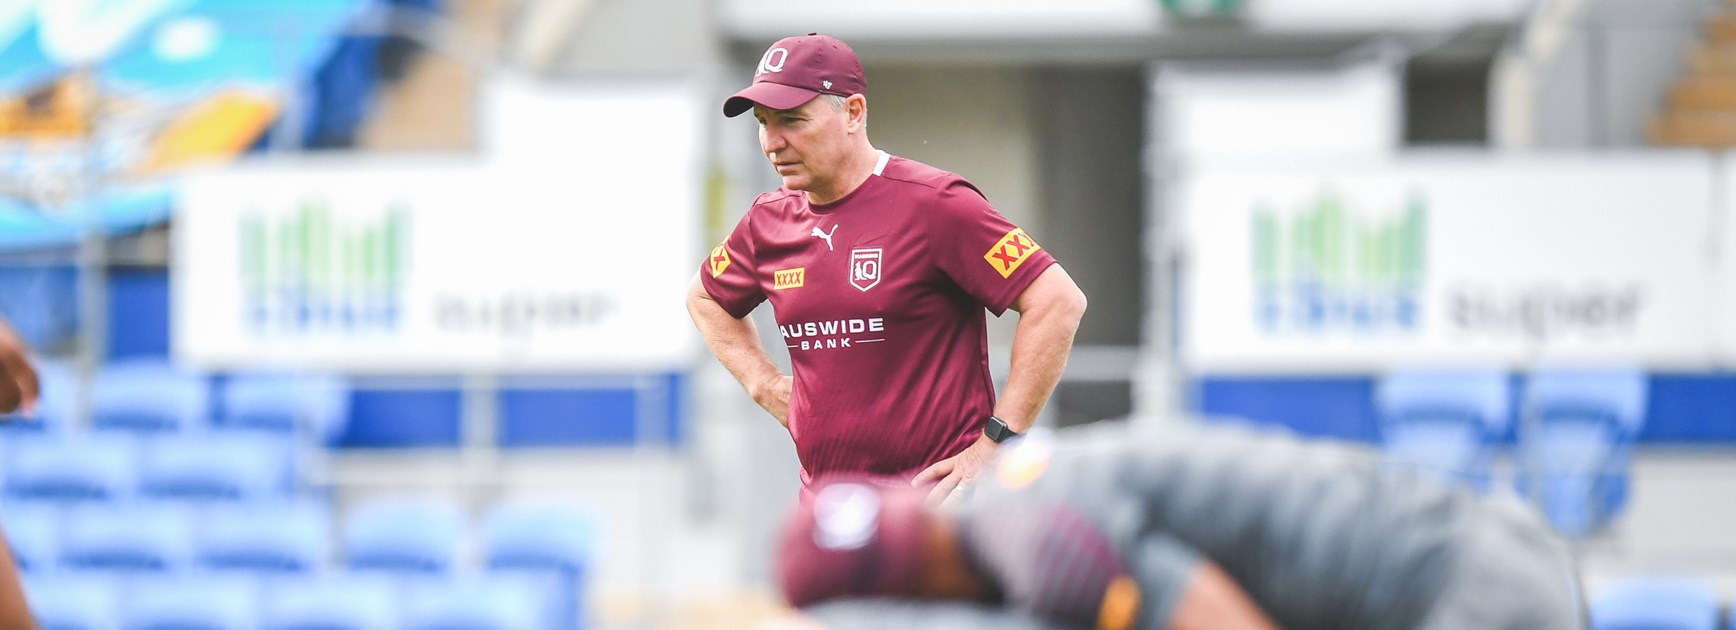 Maroons Origin II team: Walsh in, Grant out among five changes